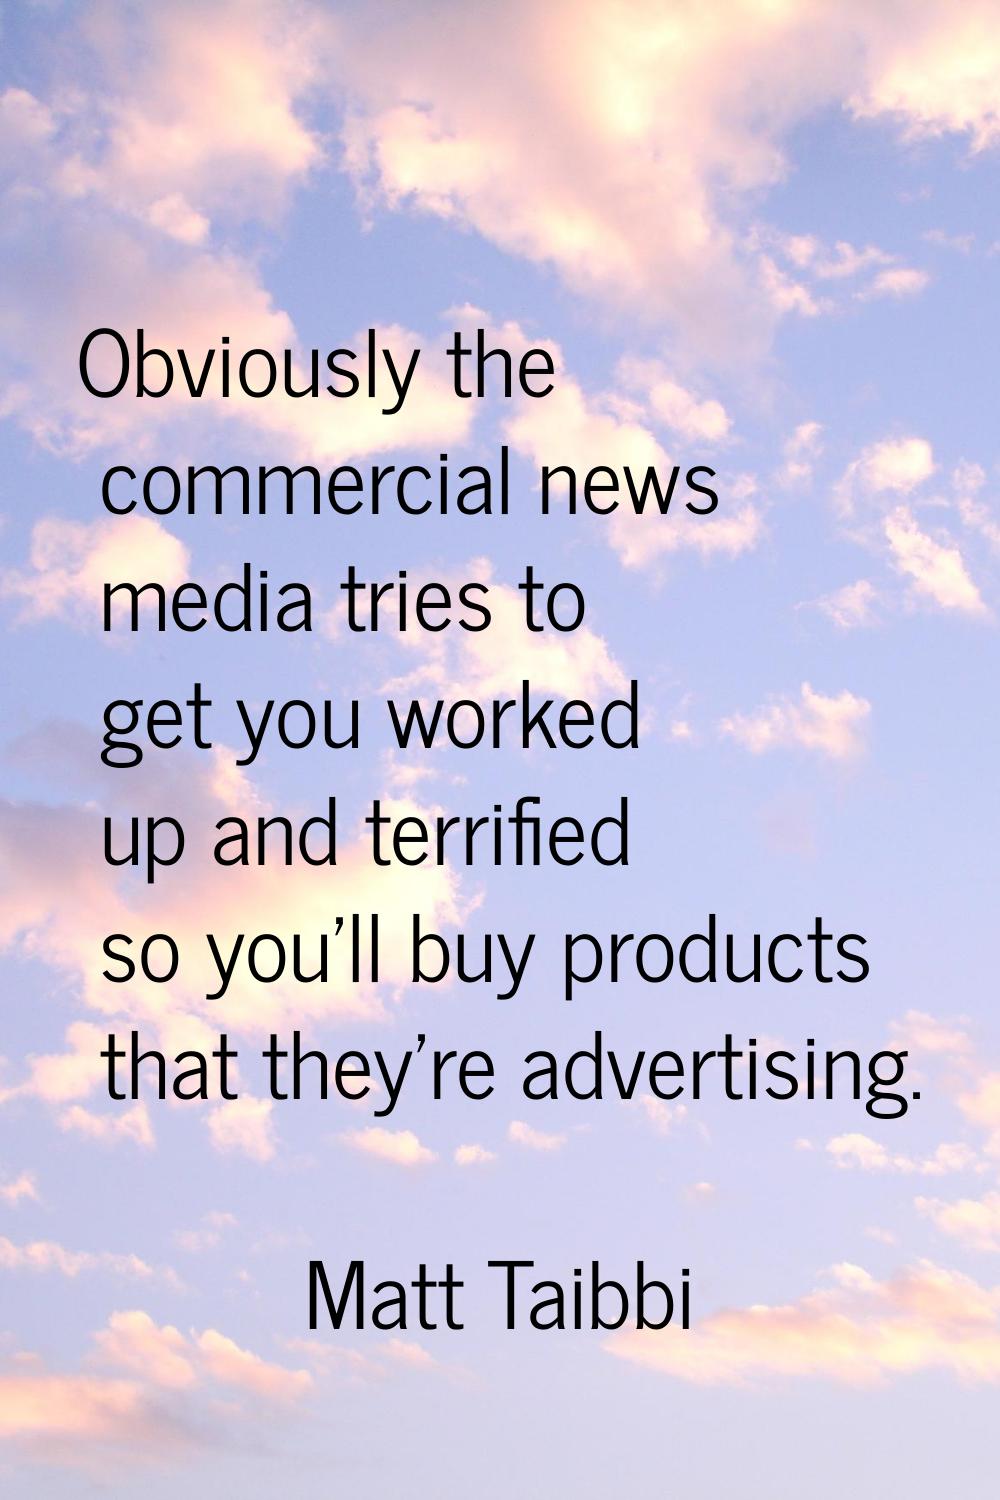 Obviously the commercial news media tries to get you worked up and terrified so you'll buy products